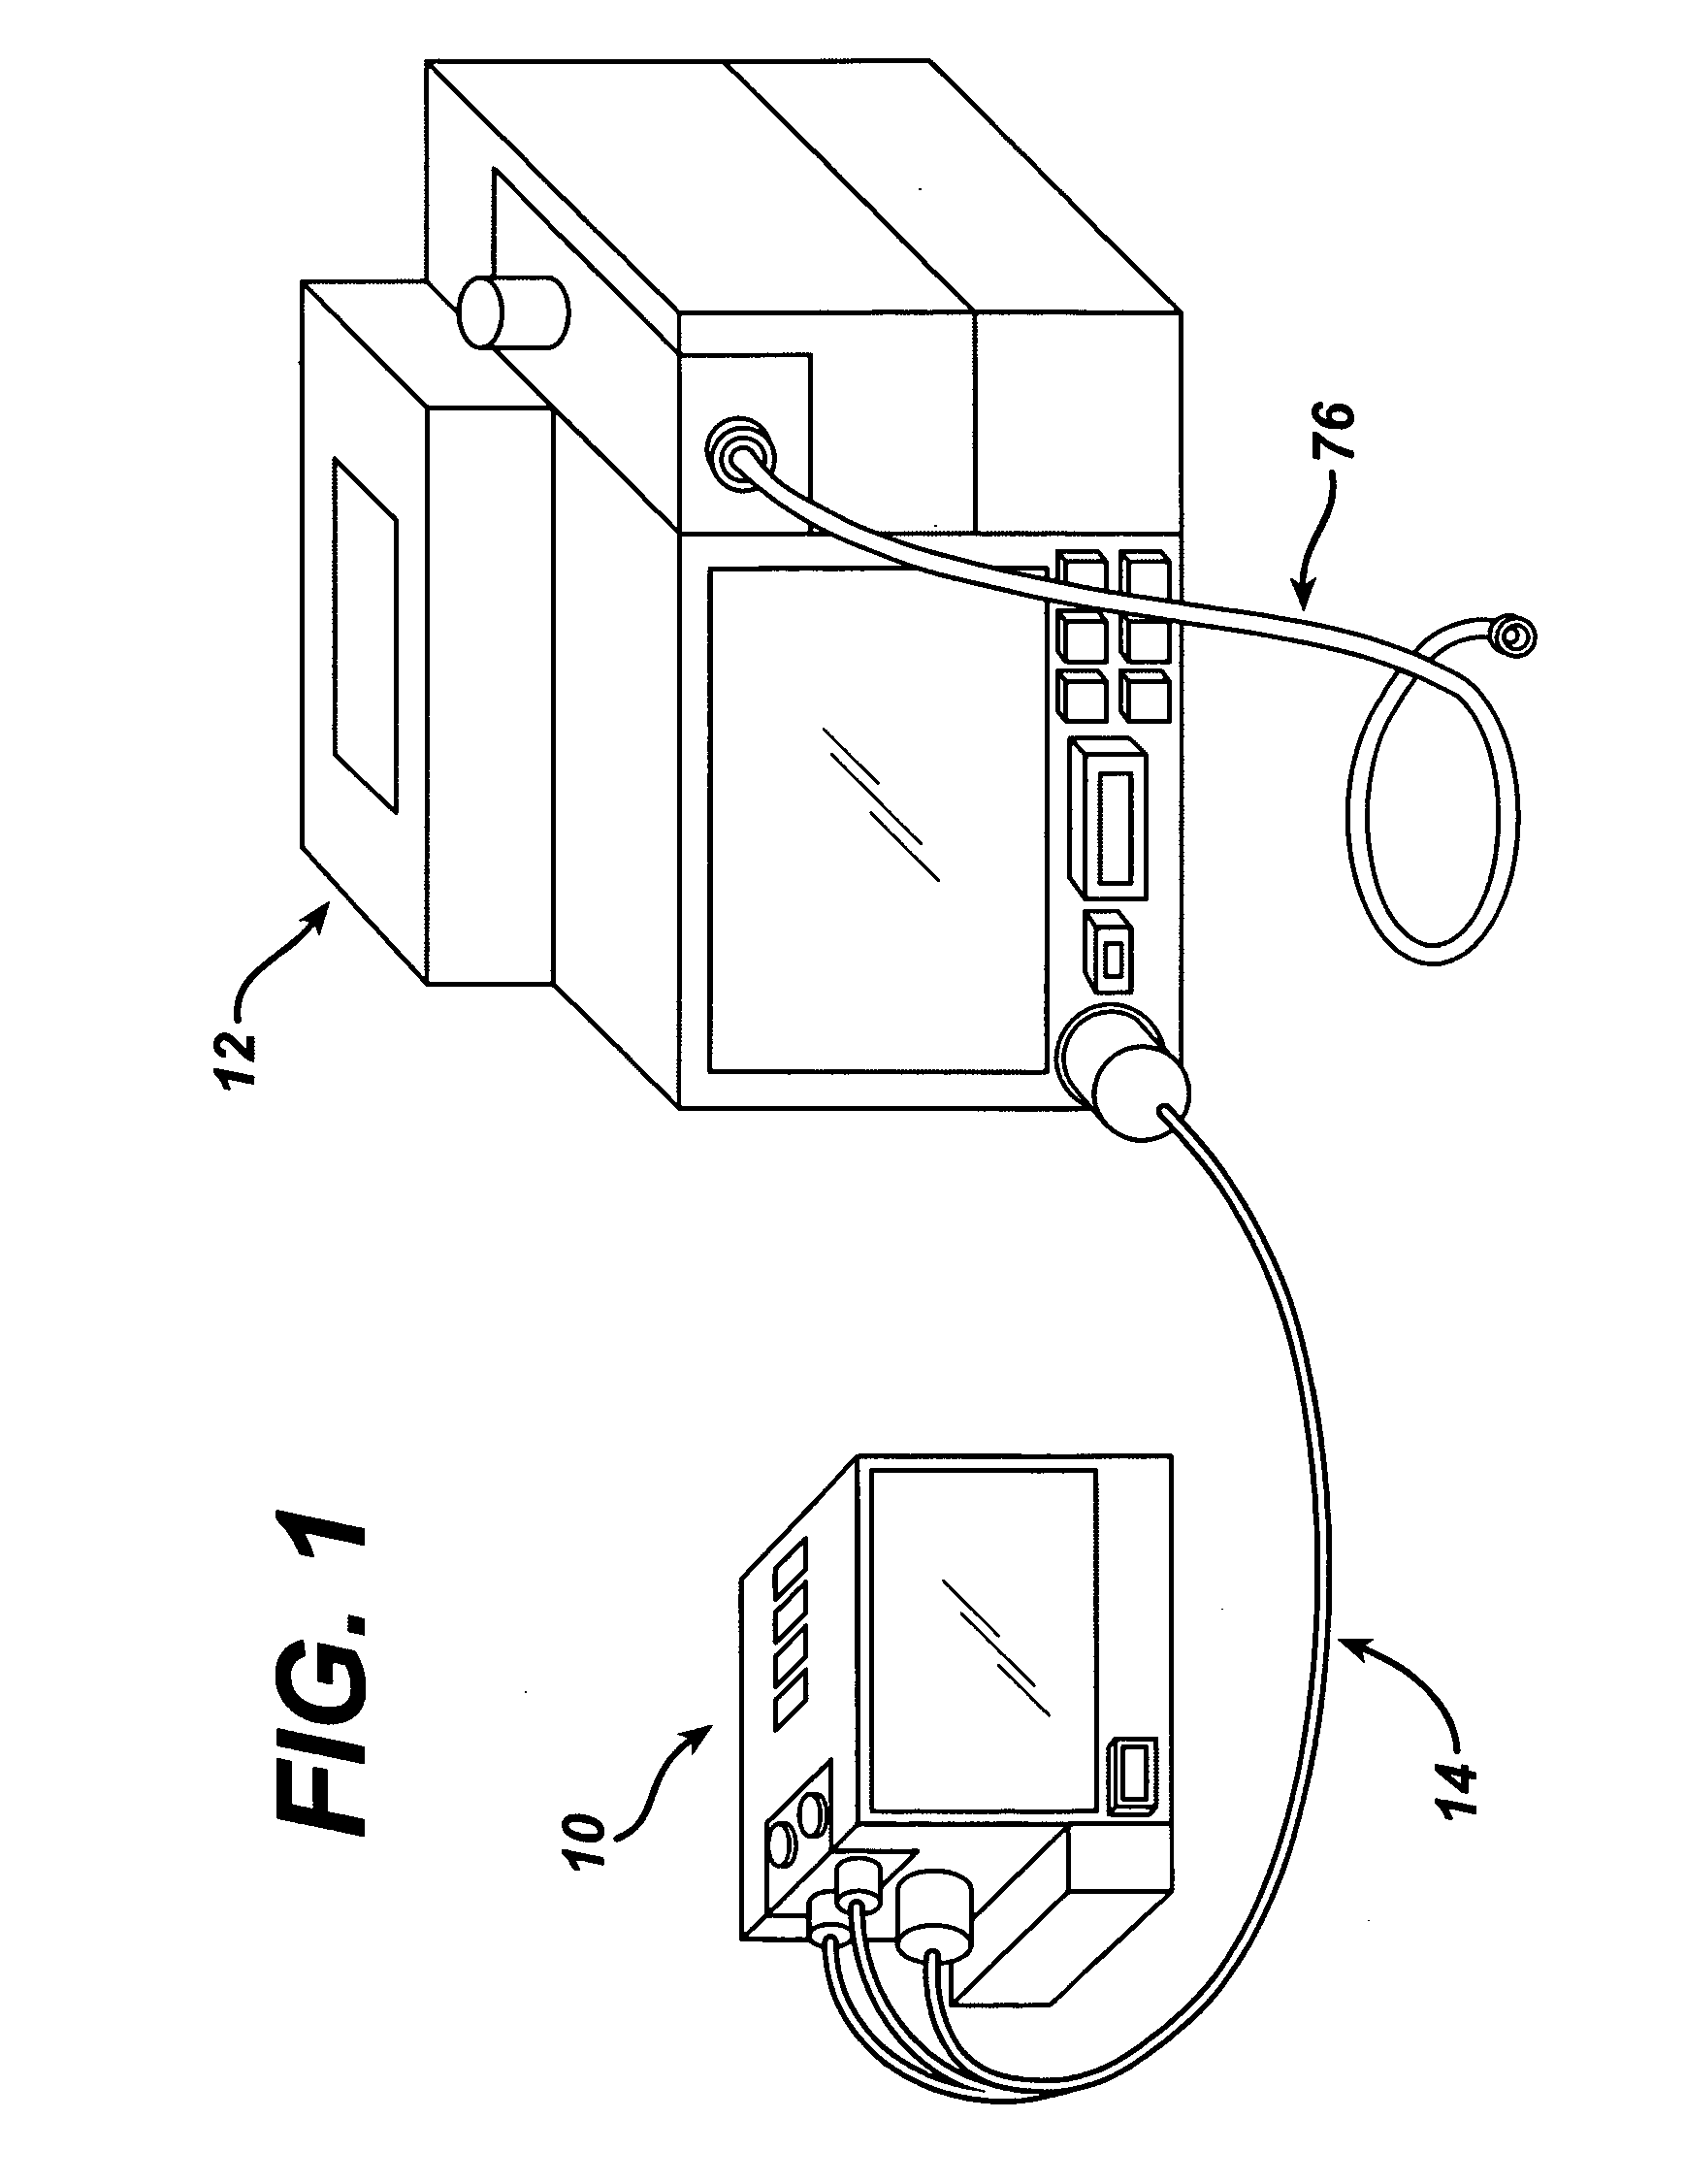 Patient monitoring and drug delivery system and method of use